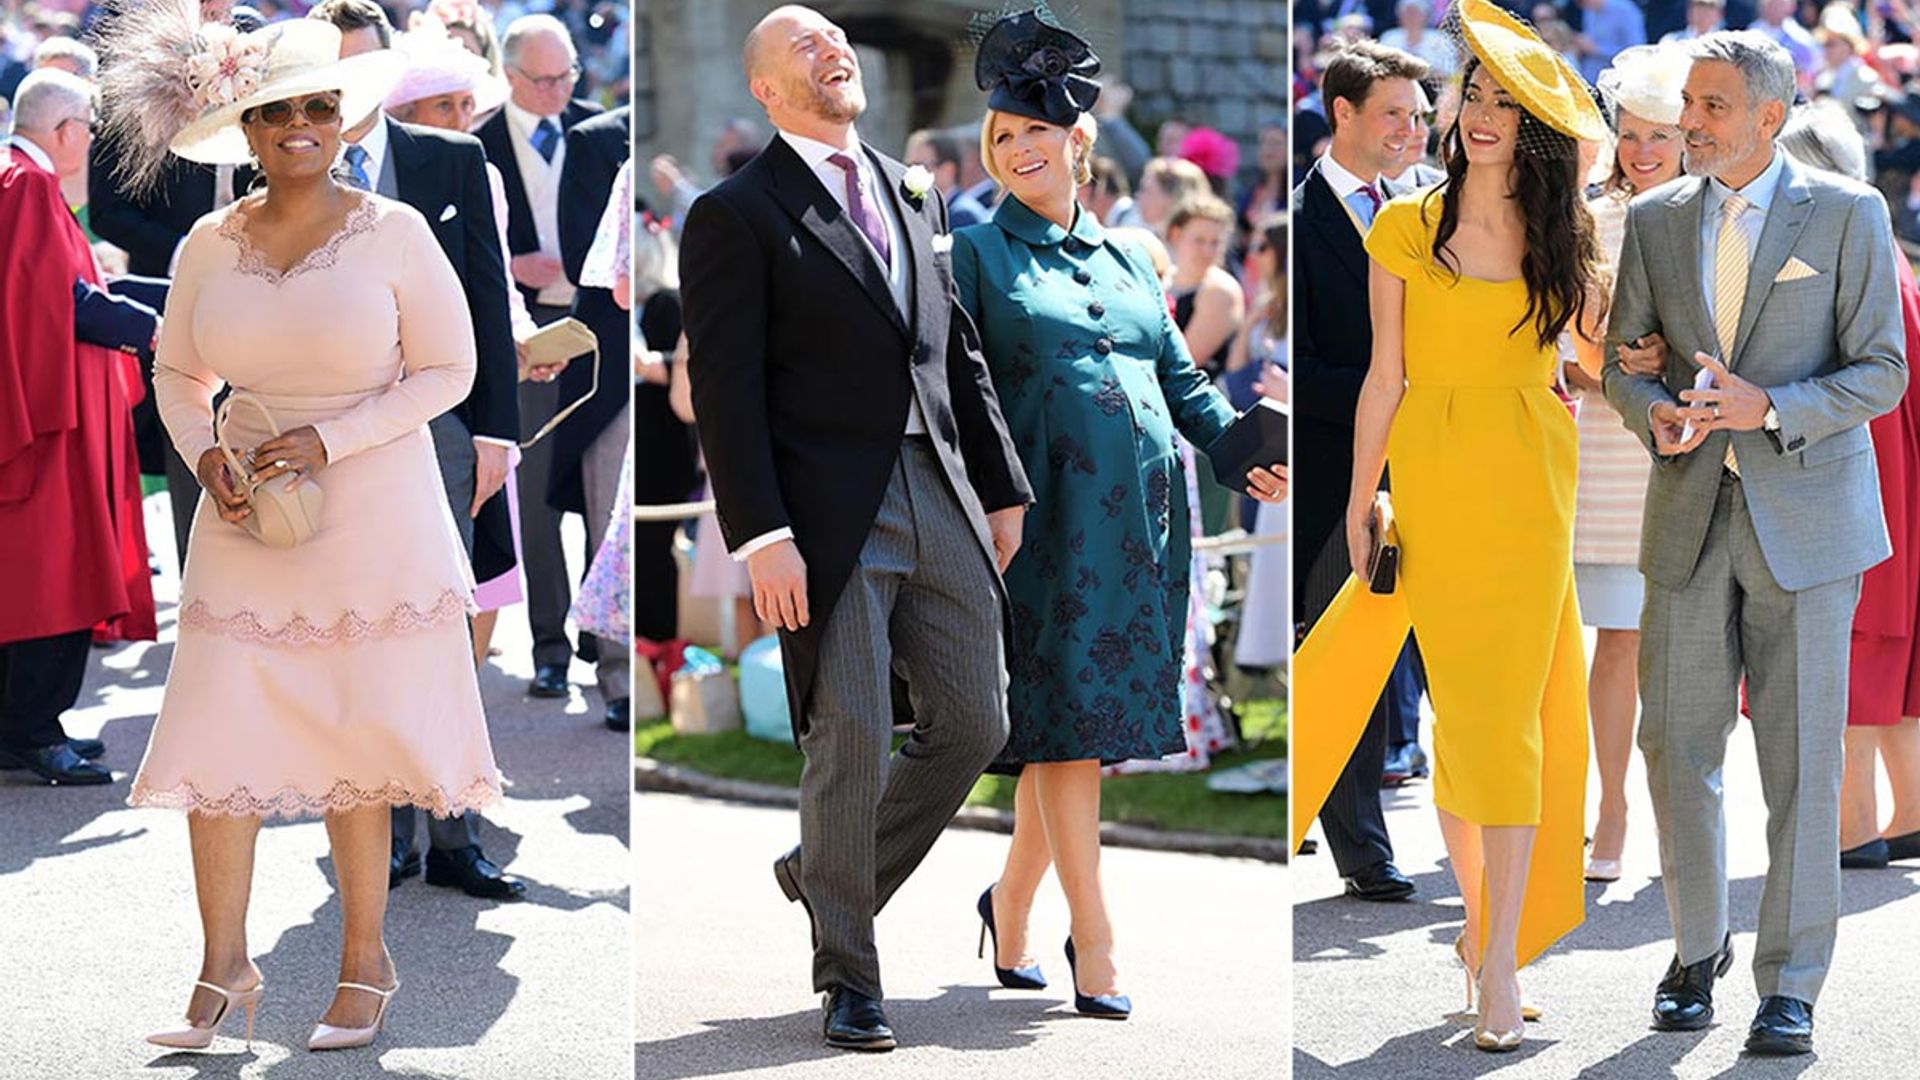 stylist guests at royal wedding